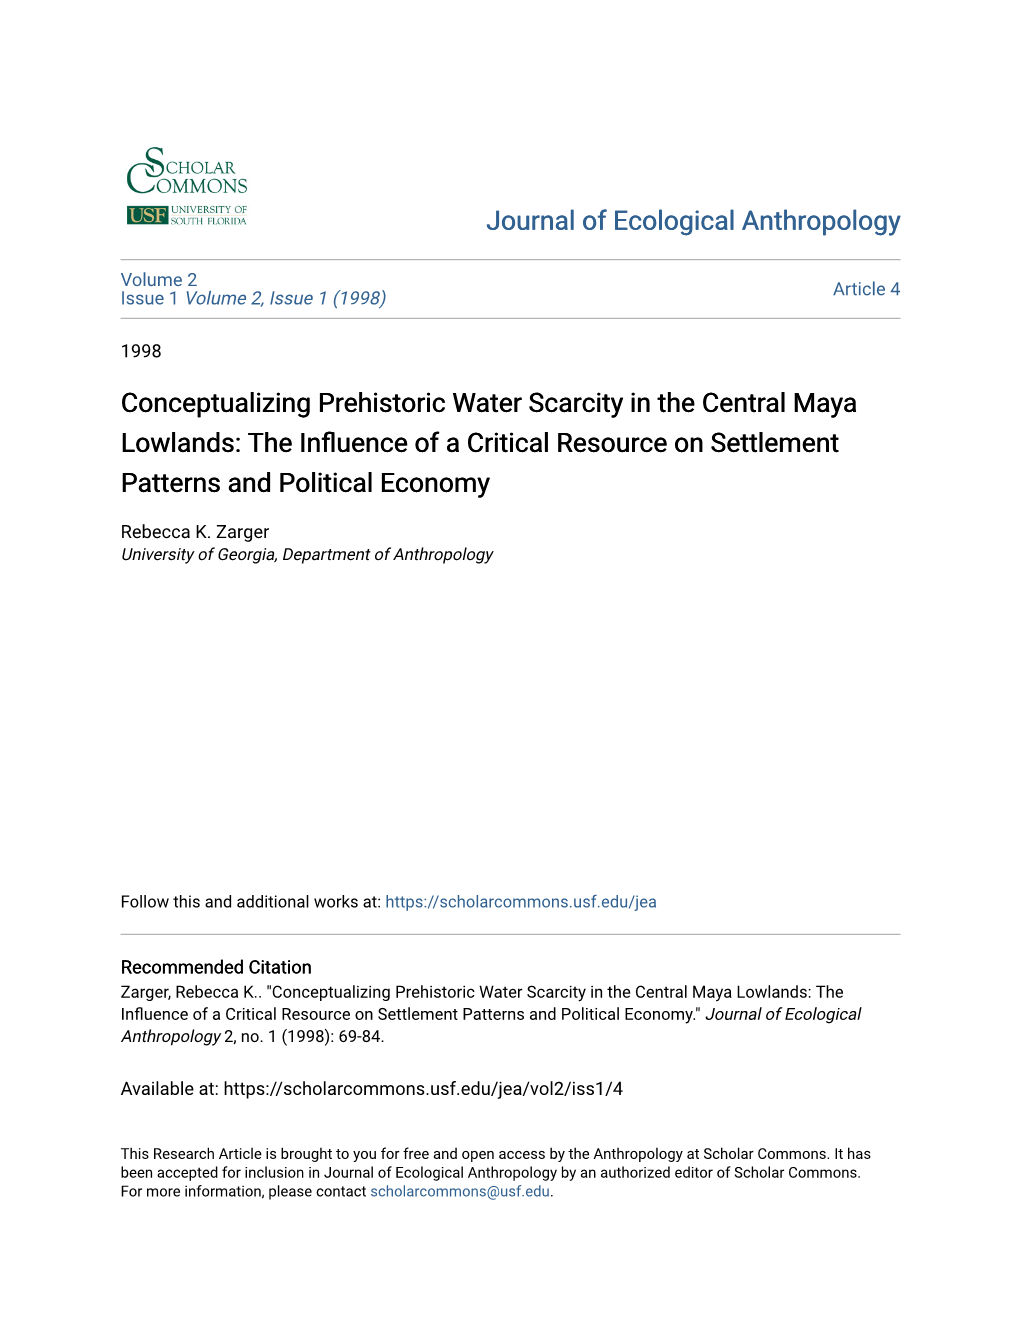 Conceptualizing Prehistoric Water Scarcity in the Central Maya Lowlands: the Influence of a Critical Resource on Settlement Patterns and Political Economy